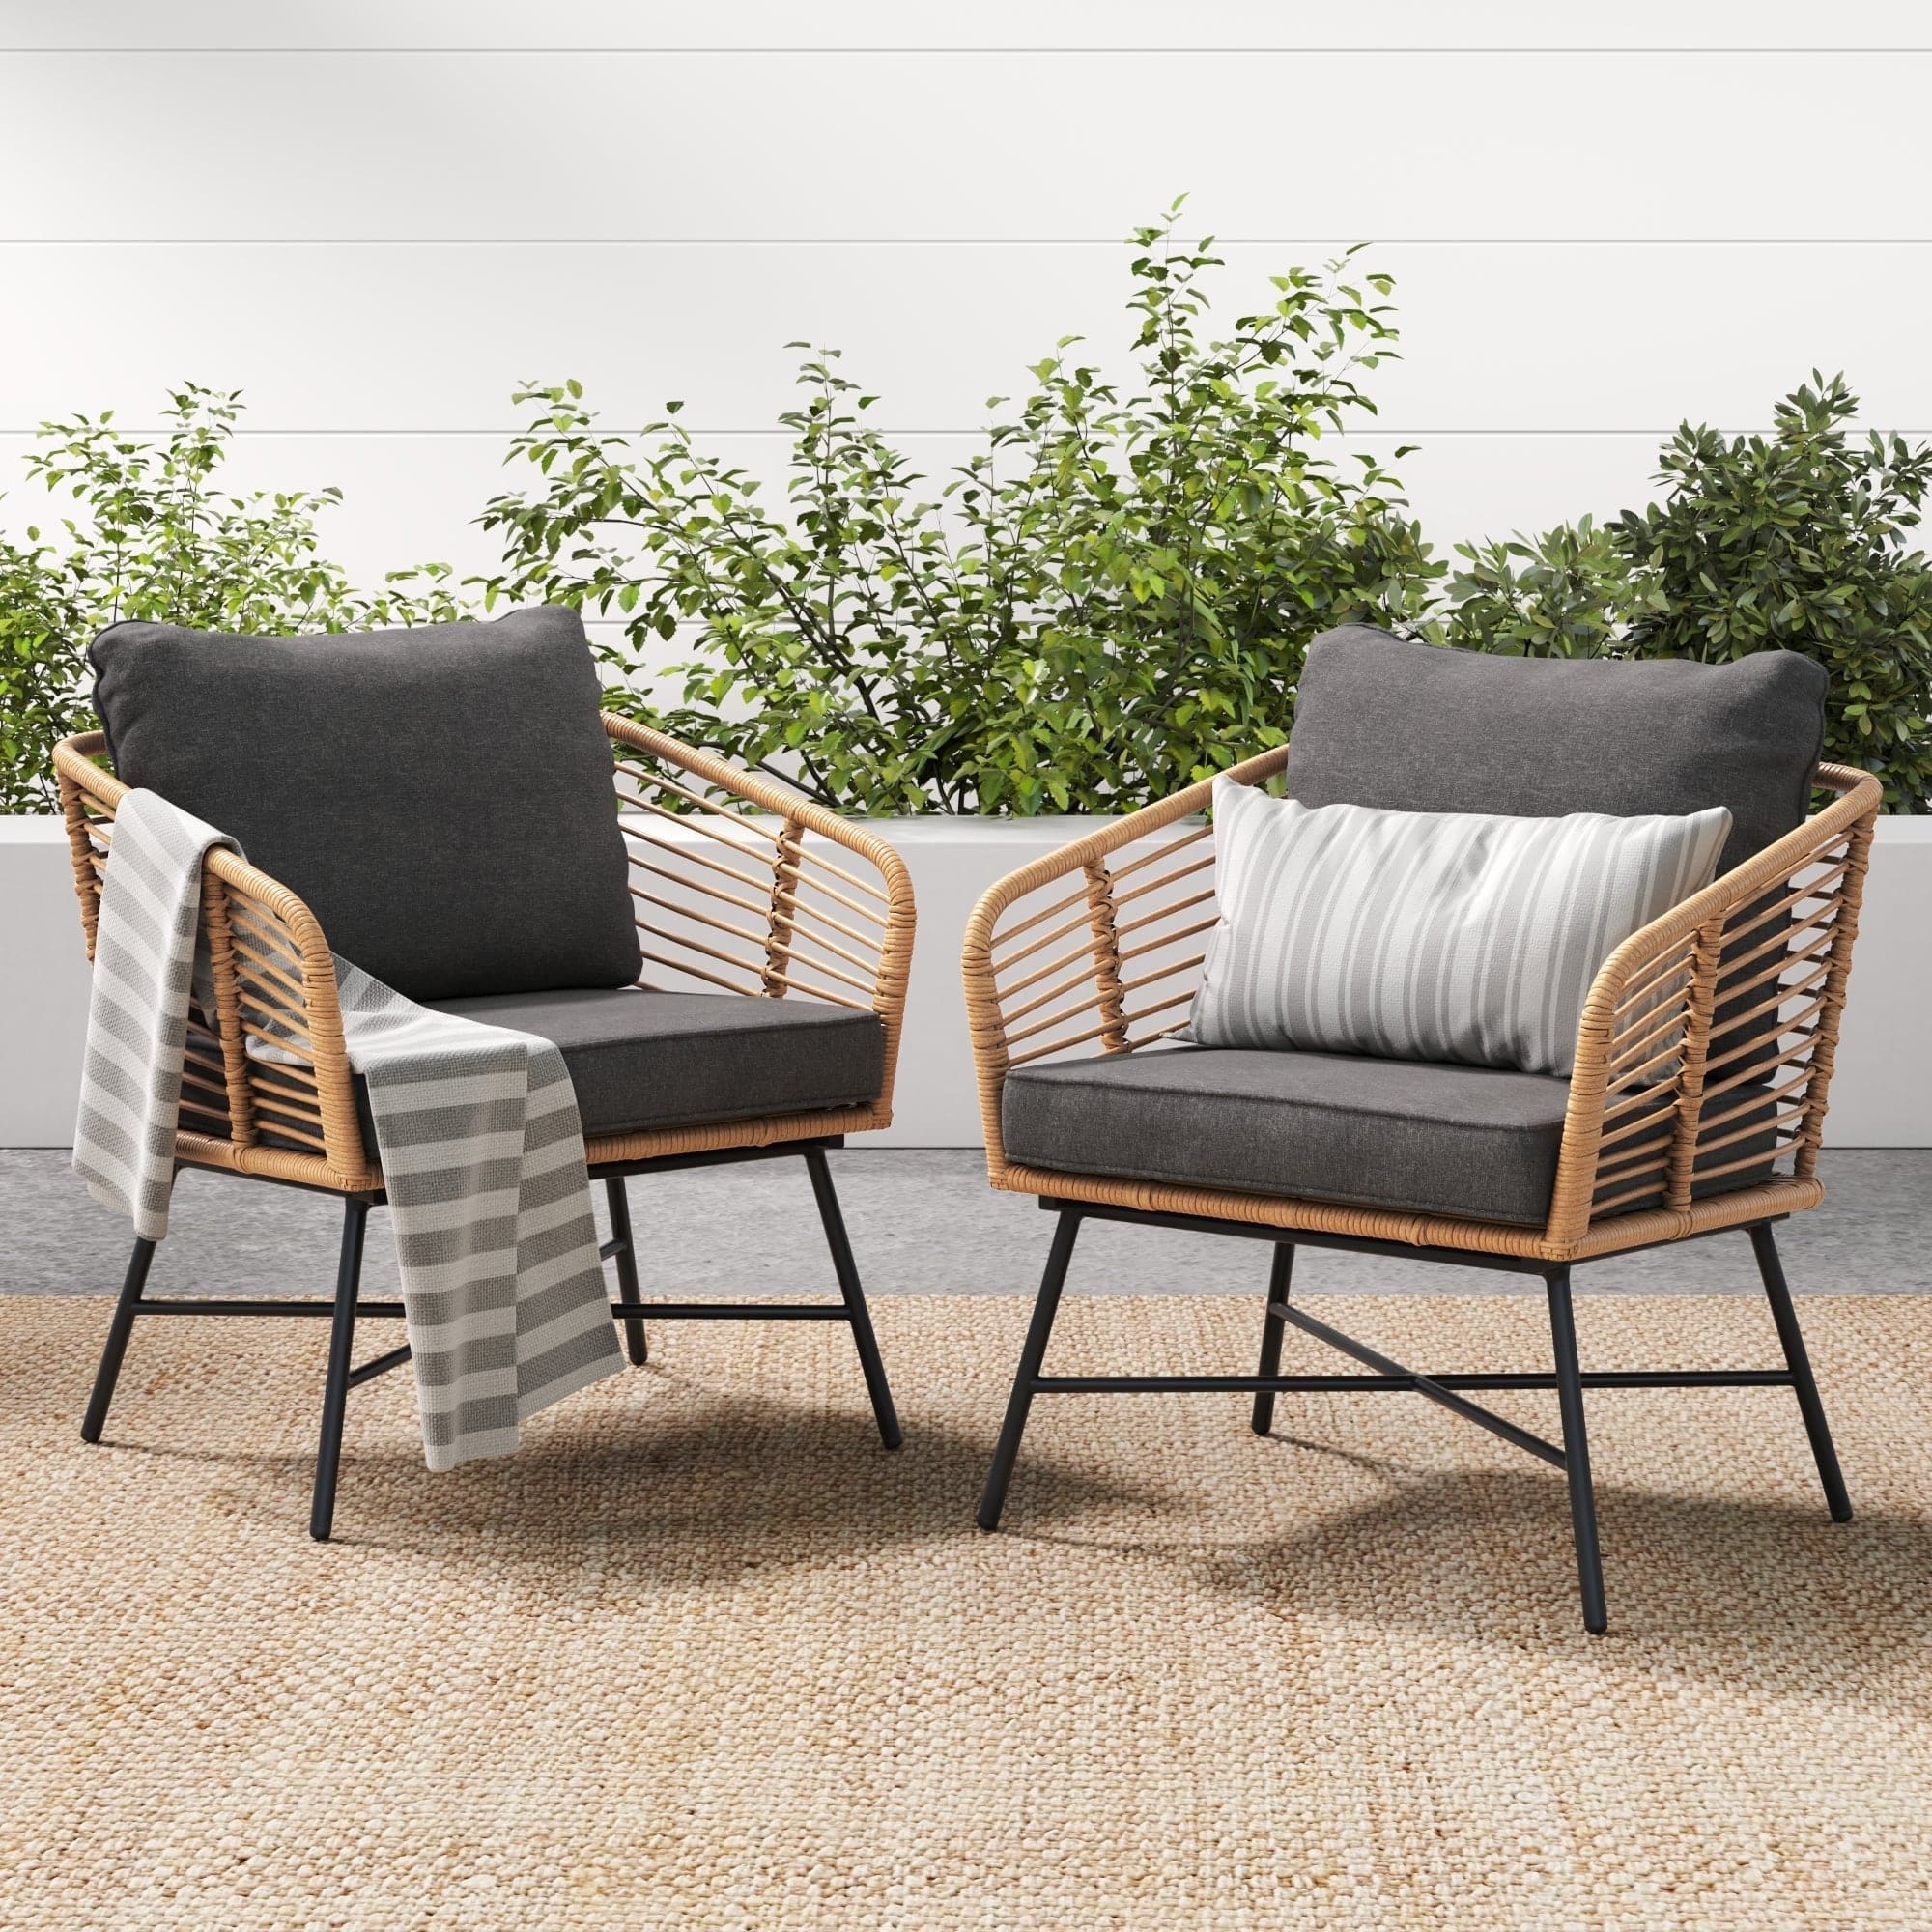 Flow Bohemian Rattan Wicker Chair  Upholstered Outdoor Chair Set For Patio Or Porch